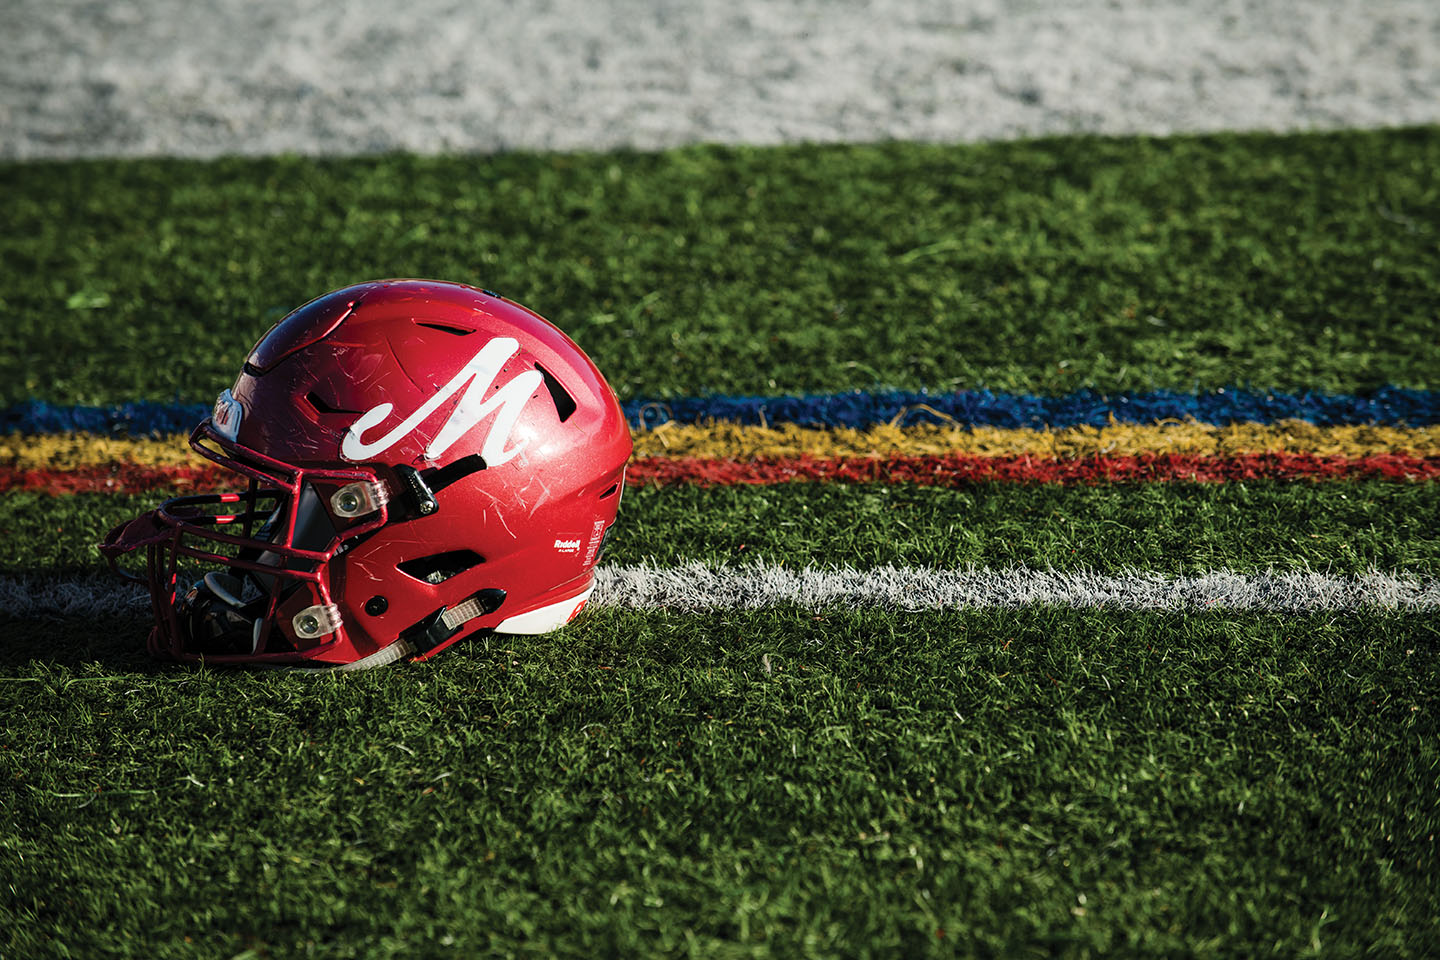 A red football helmet with a white M on it on a football field